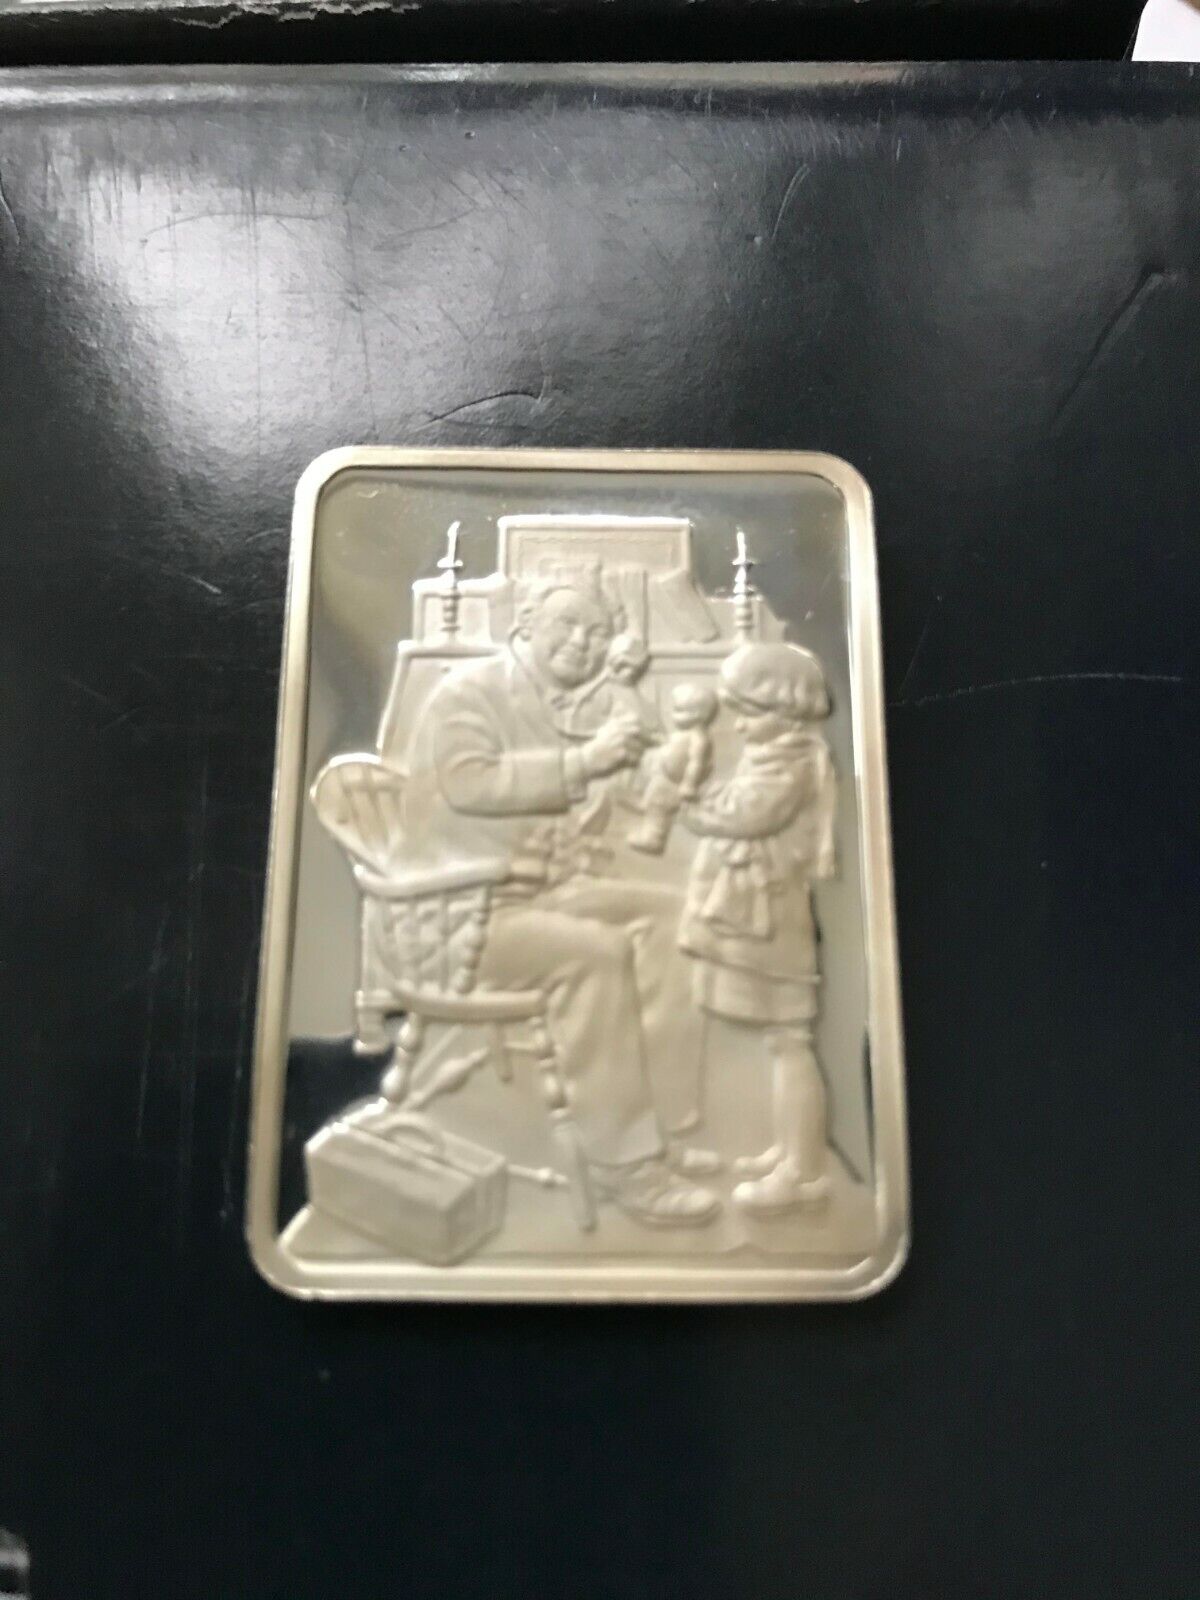 USA NORMAN ROCKWELL DOCTOR AND DOLL 999 SILVER ART BAR 1 TROY oz